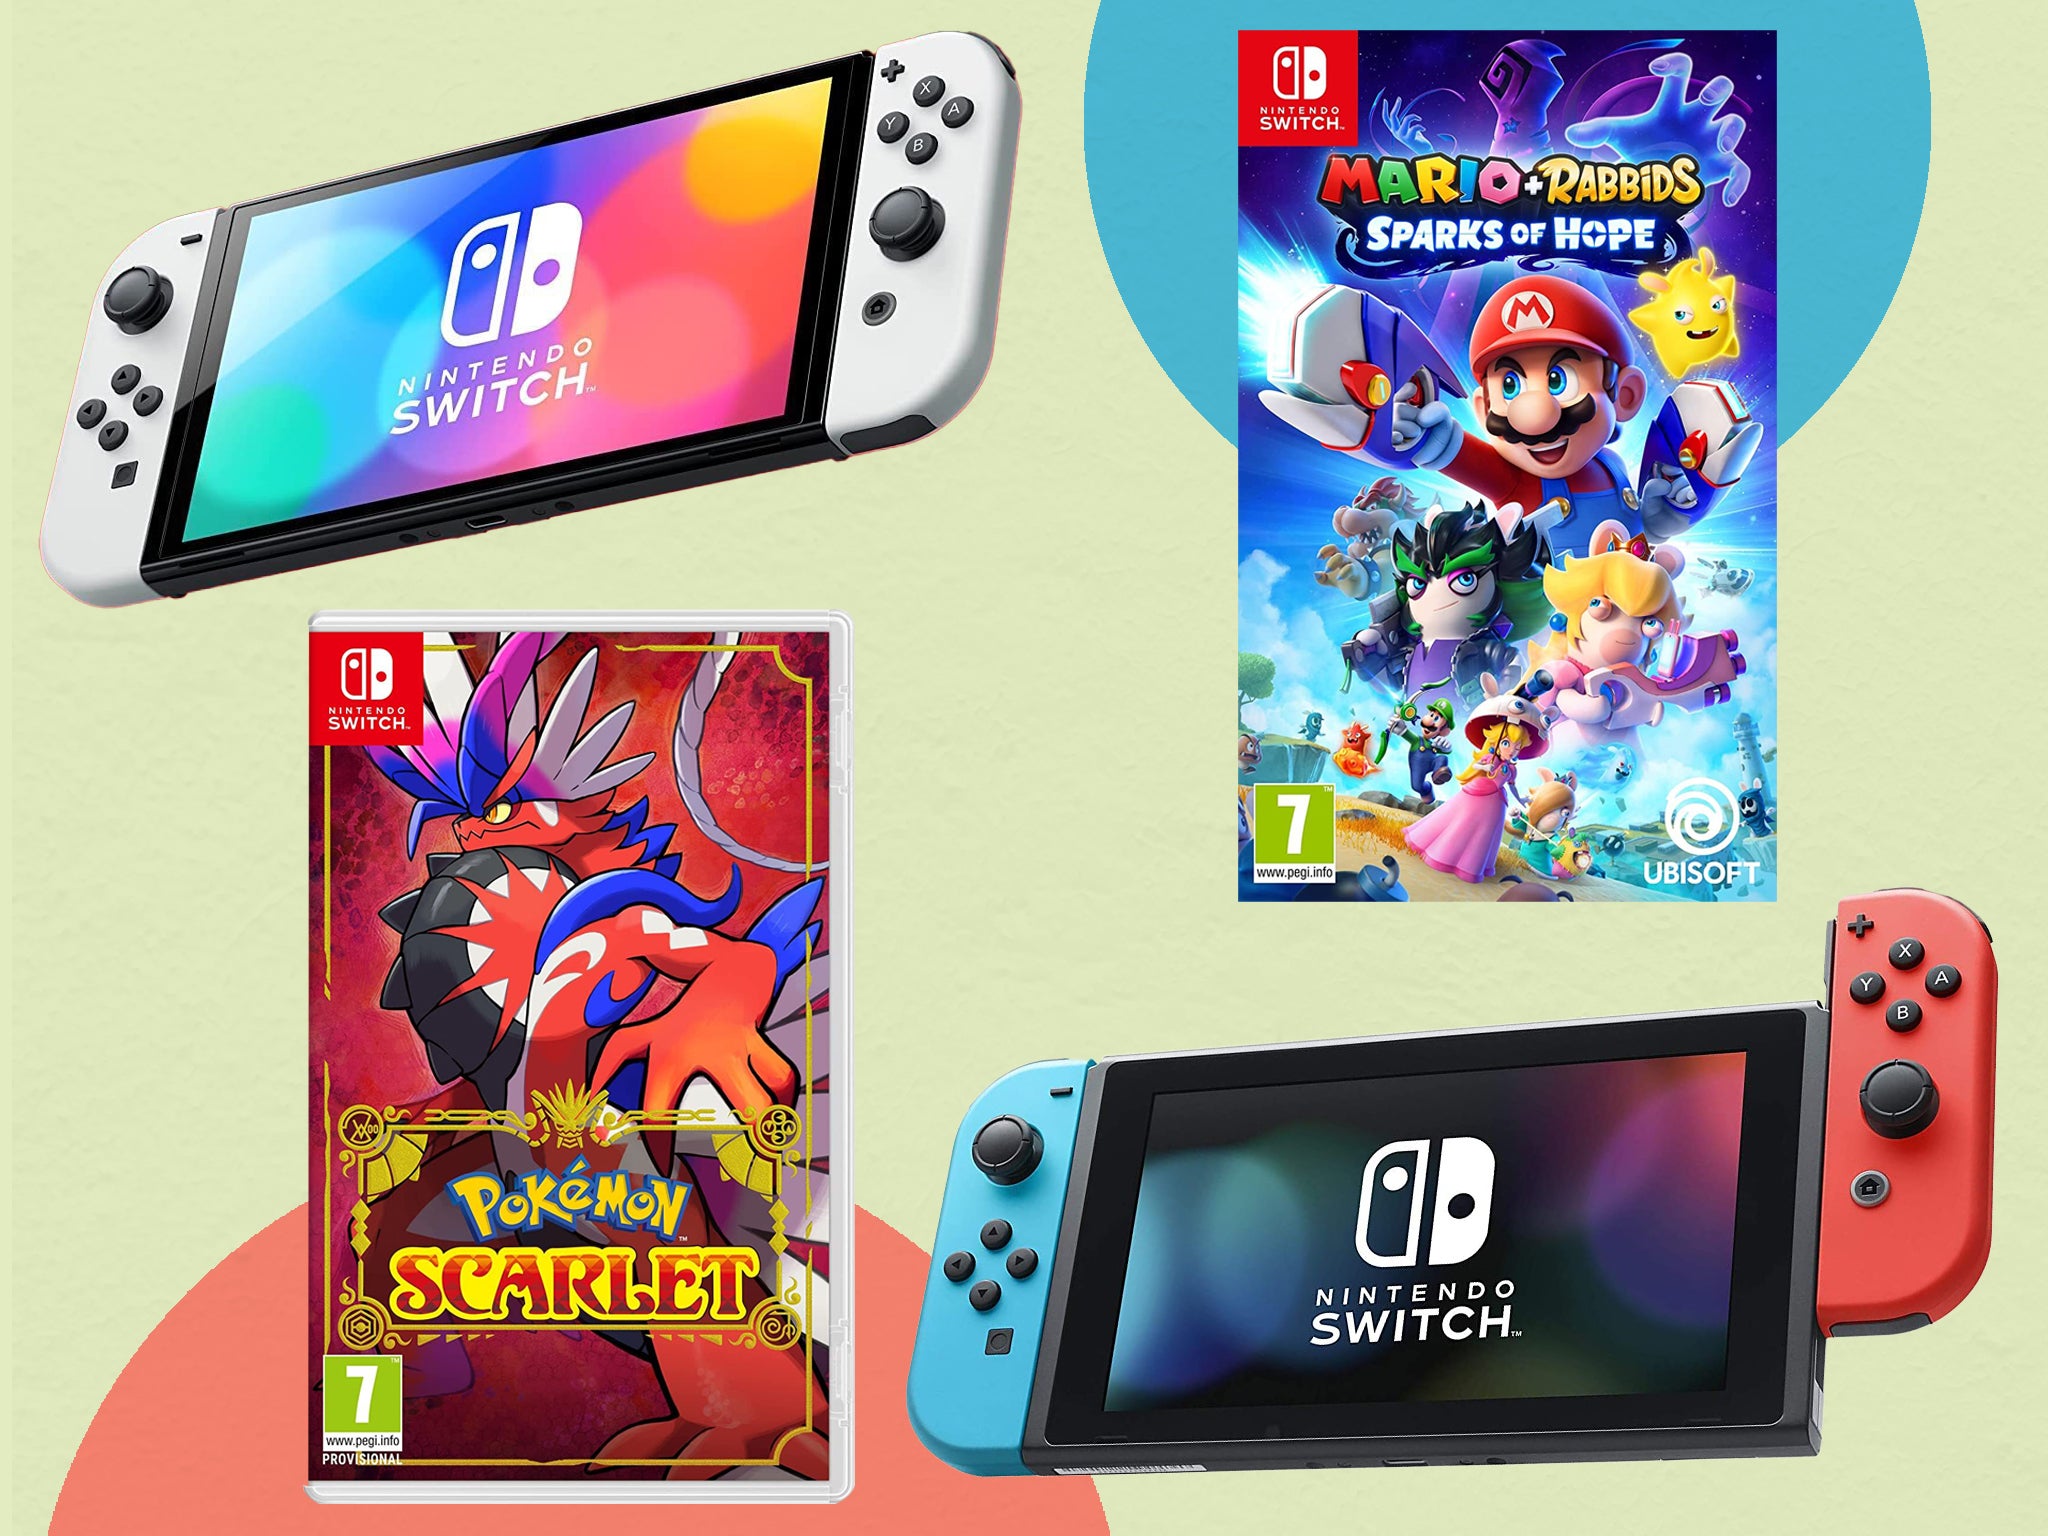 Nintendo Switch deals for Black Friday 2022: Best offers on consoles, games and bundles